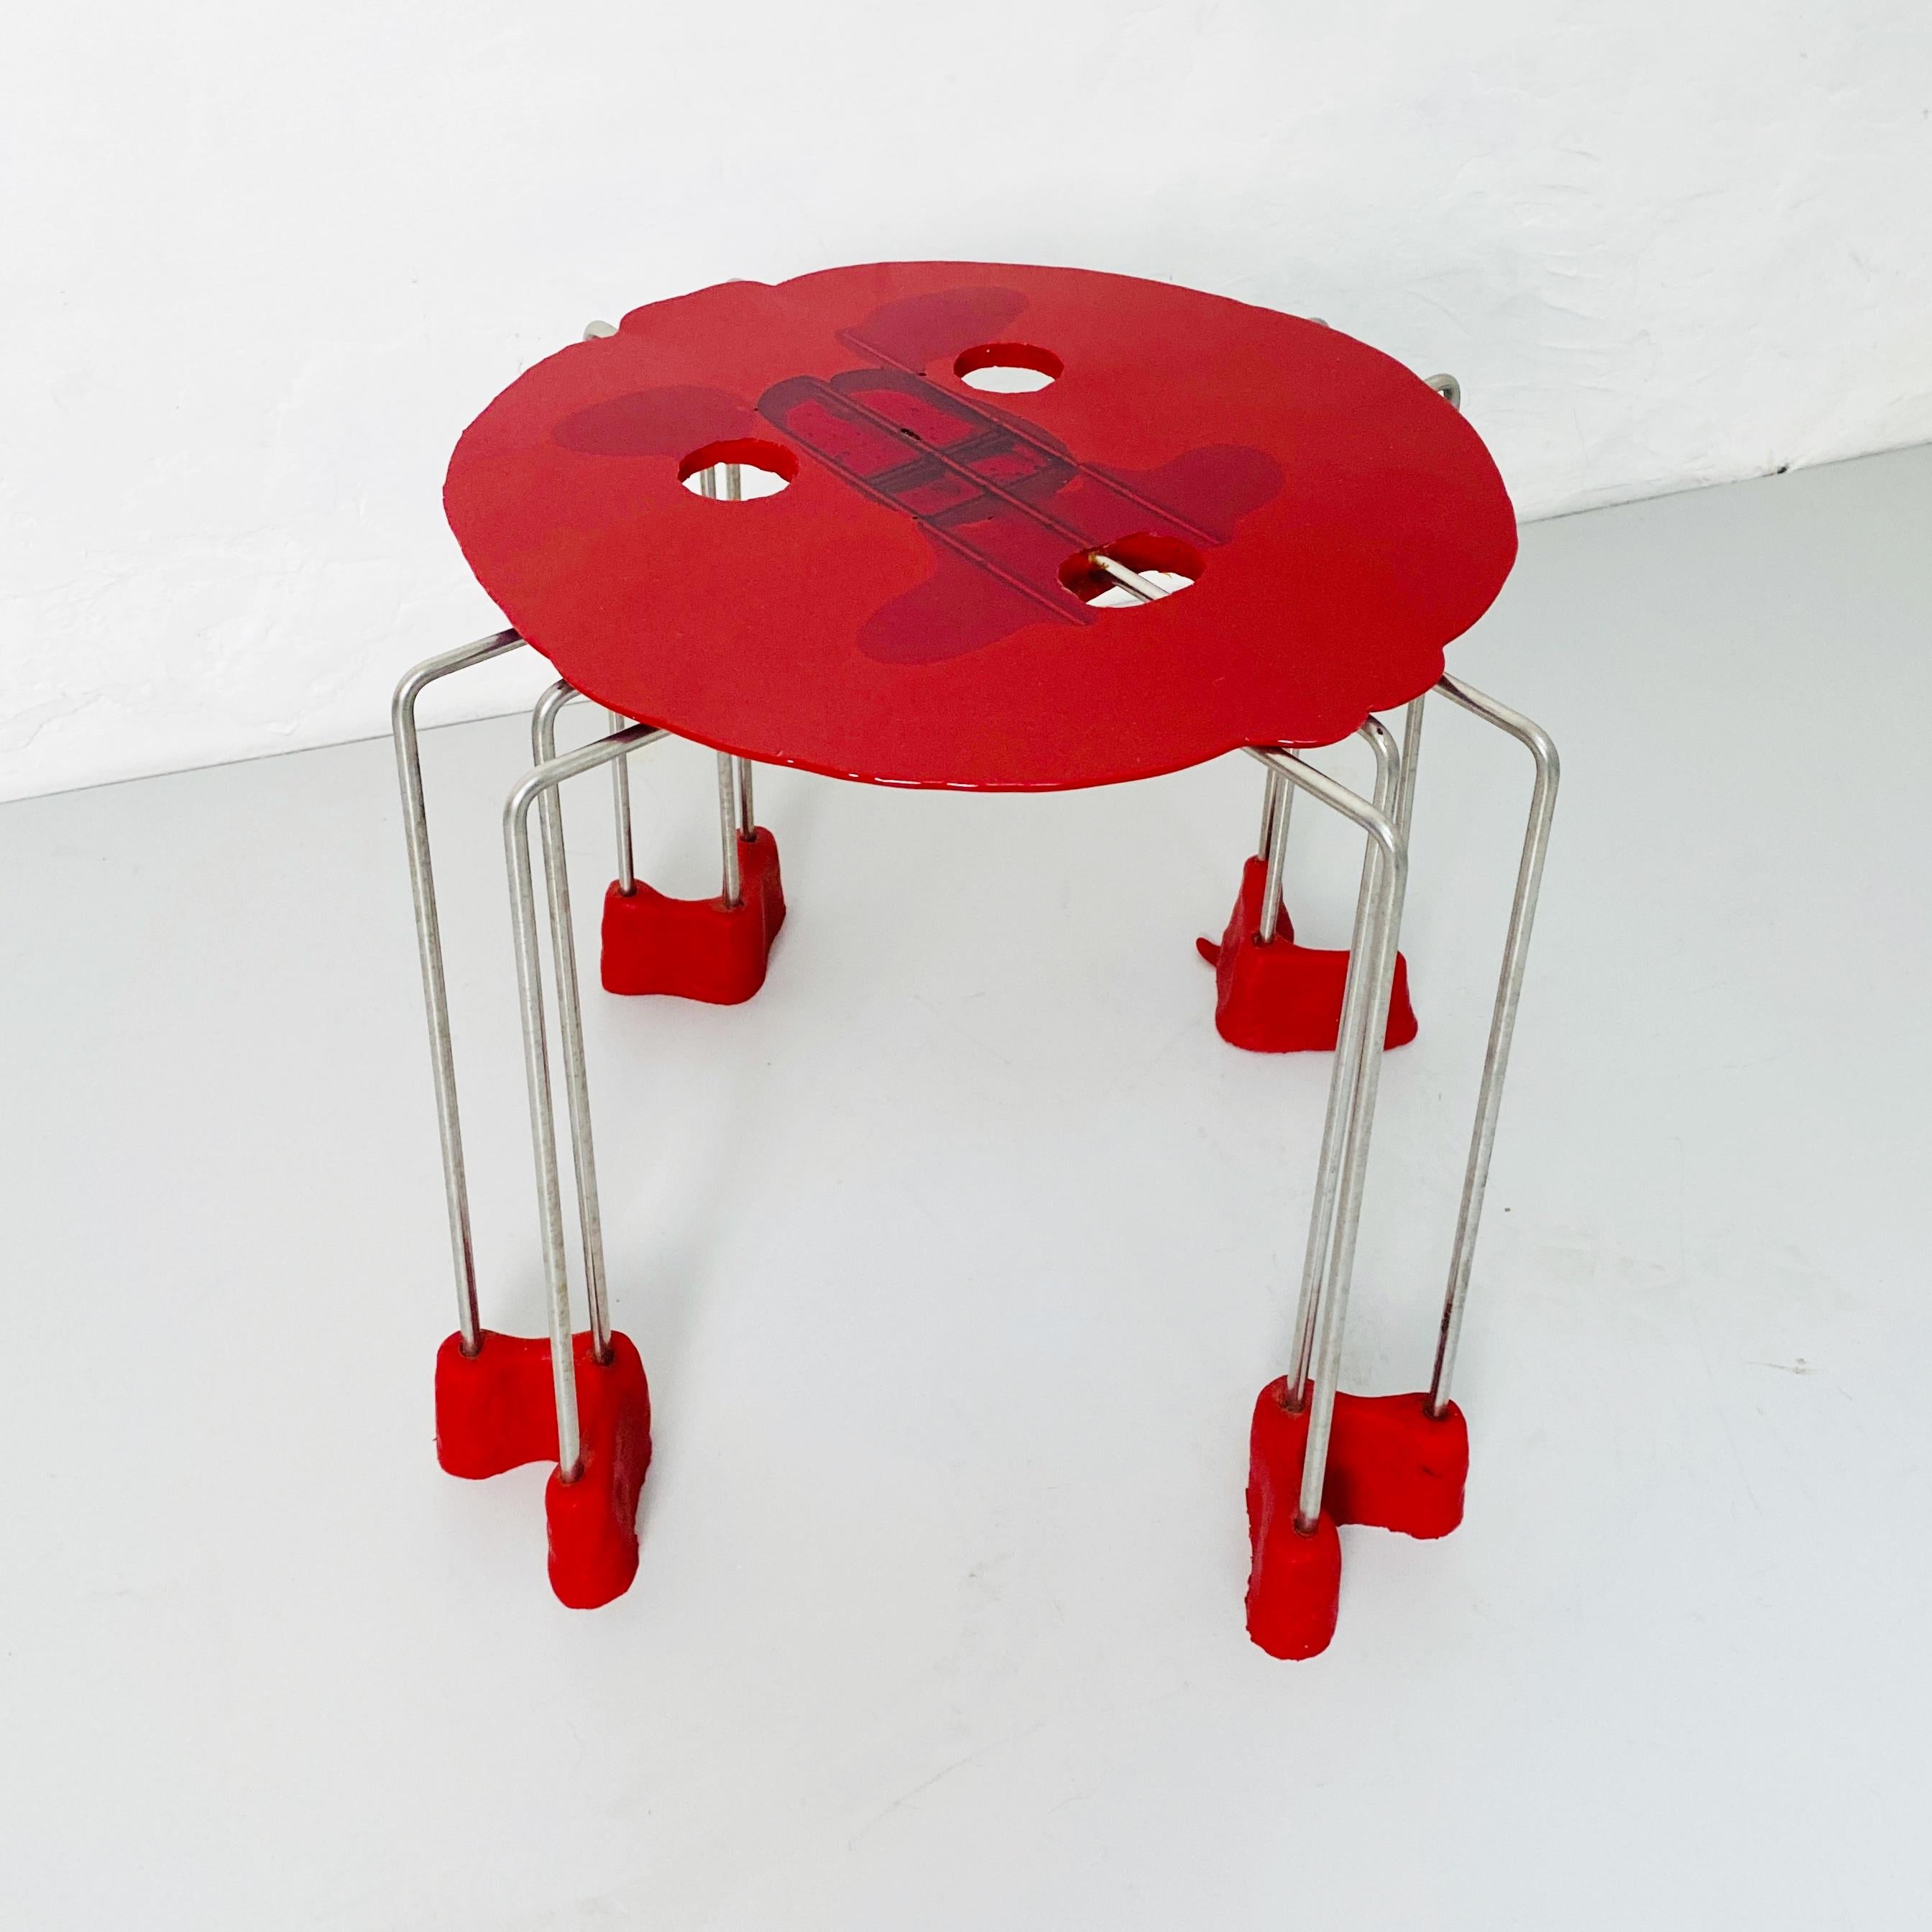 Italian Modern Triple Play Resin Stool by Gaetano Pesce for Fish Design, 2000s For Sale 3